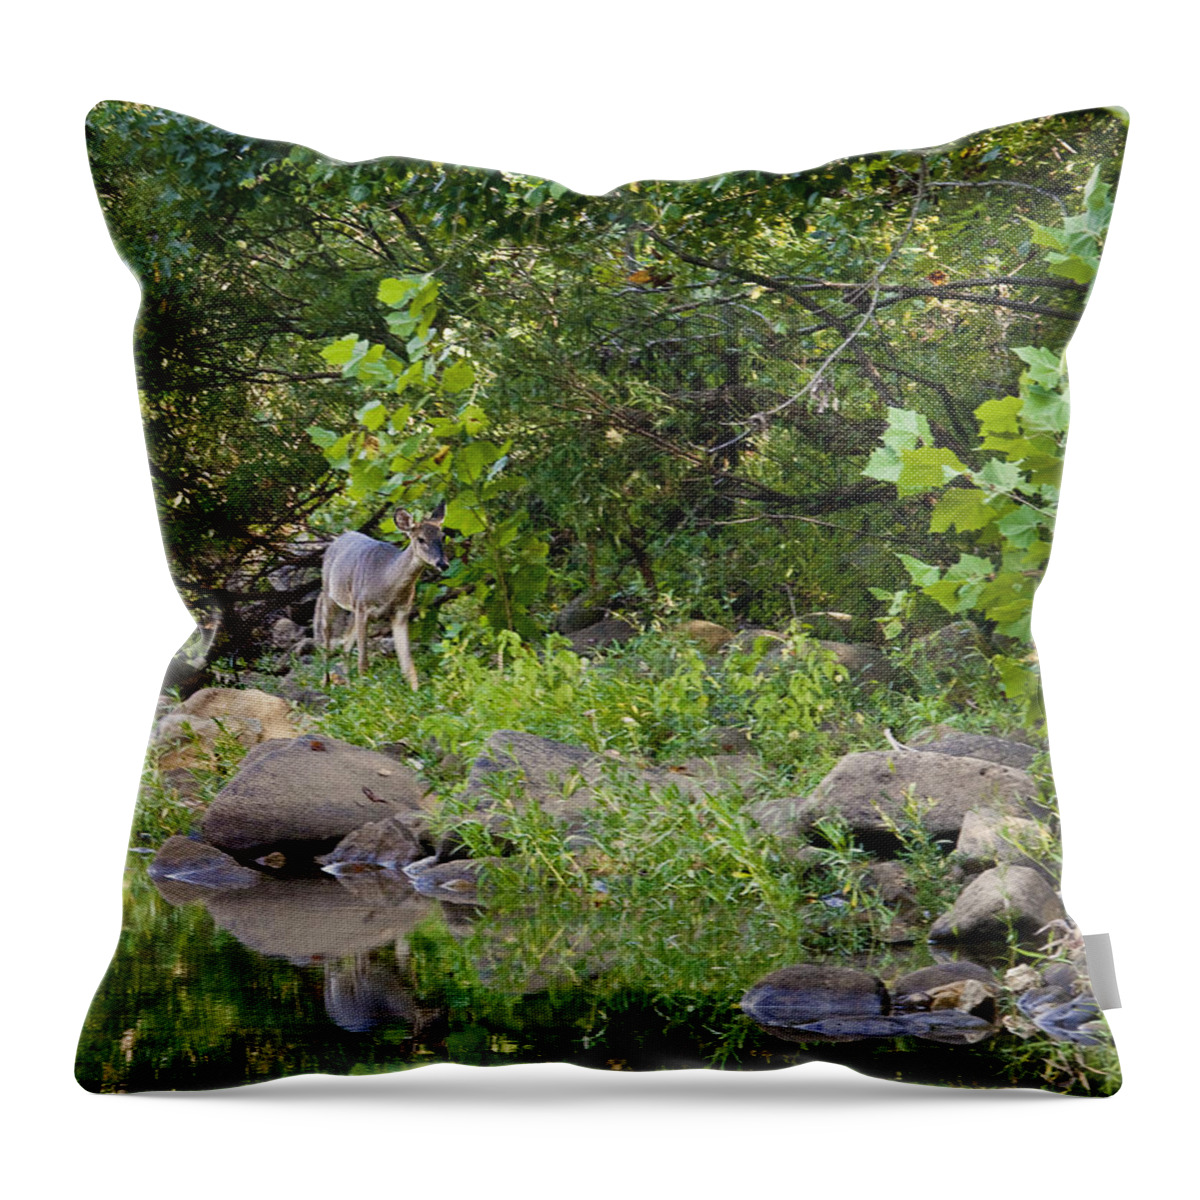 Whtietail Deer Throw Pillow featuring the photograph Whtietail Deer Along the Buffalo River by Michael Dougherty